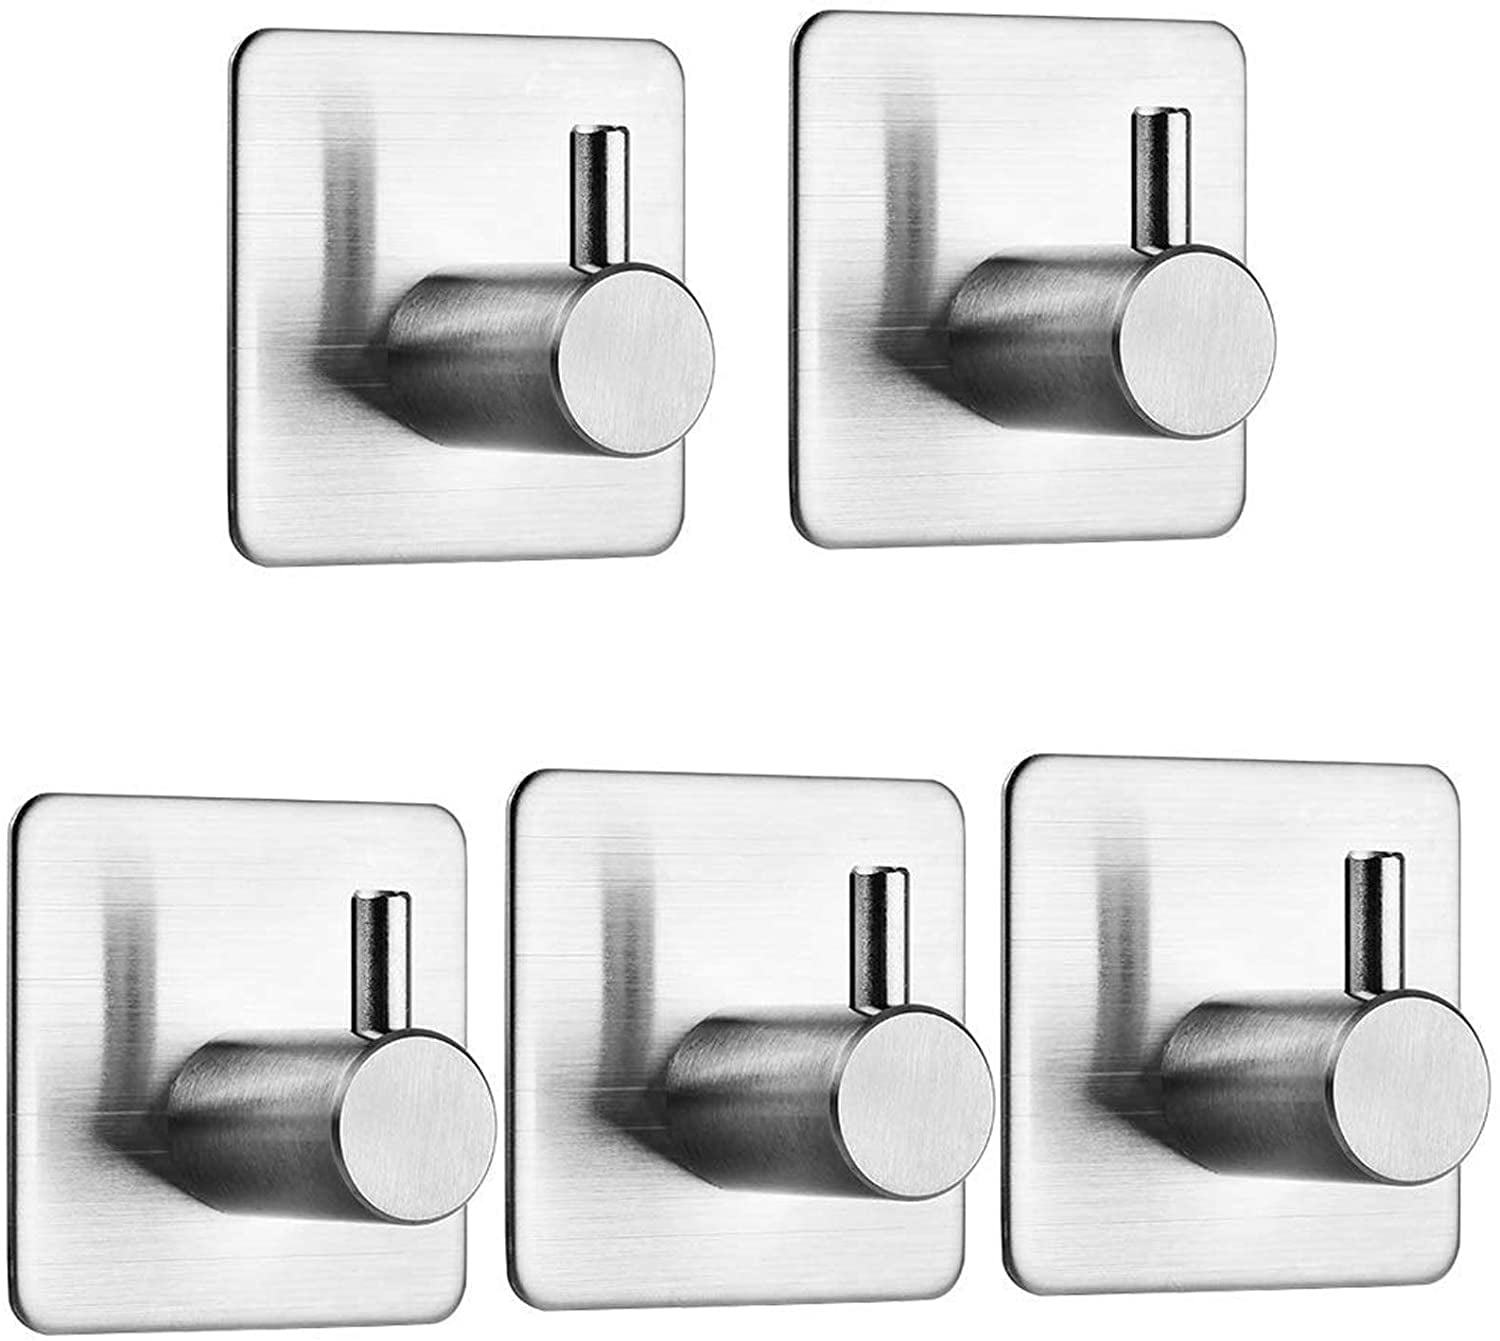 Self Adhesive Hooks Stainless Steel Stick on Wall Sticky Storage Peg Hanger 